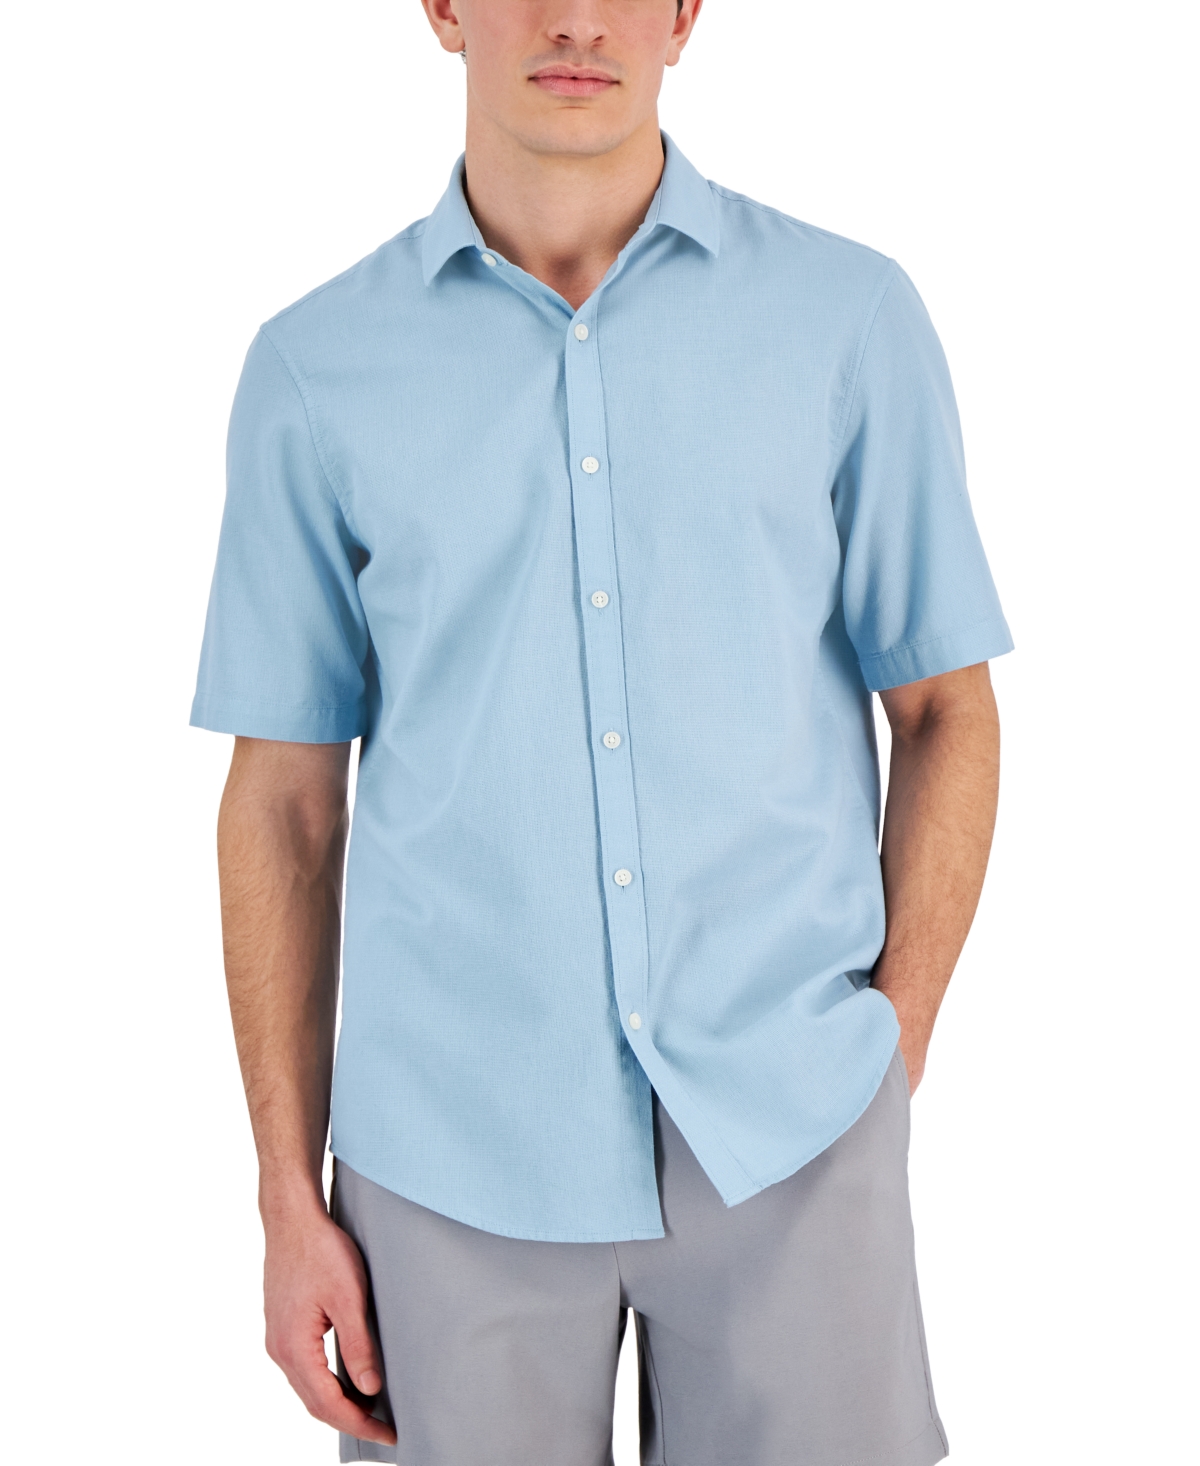 Men's Short-Sleeve Solid Textured Shirt, Created for Macy's - Neo Navy